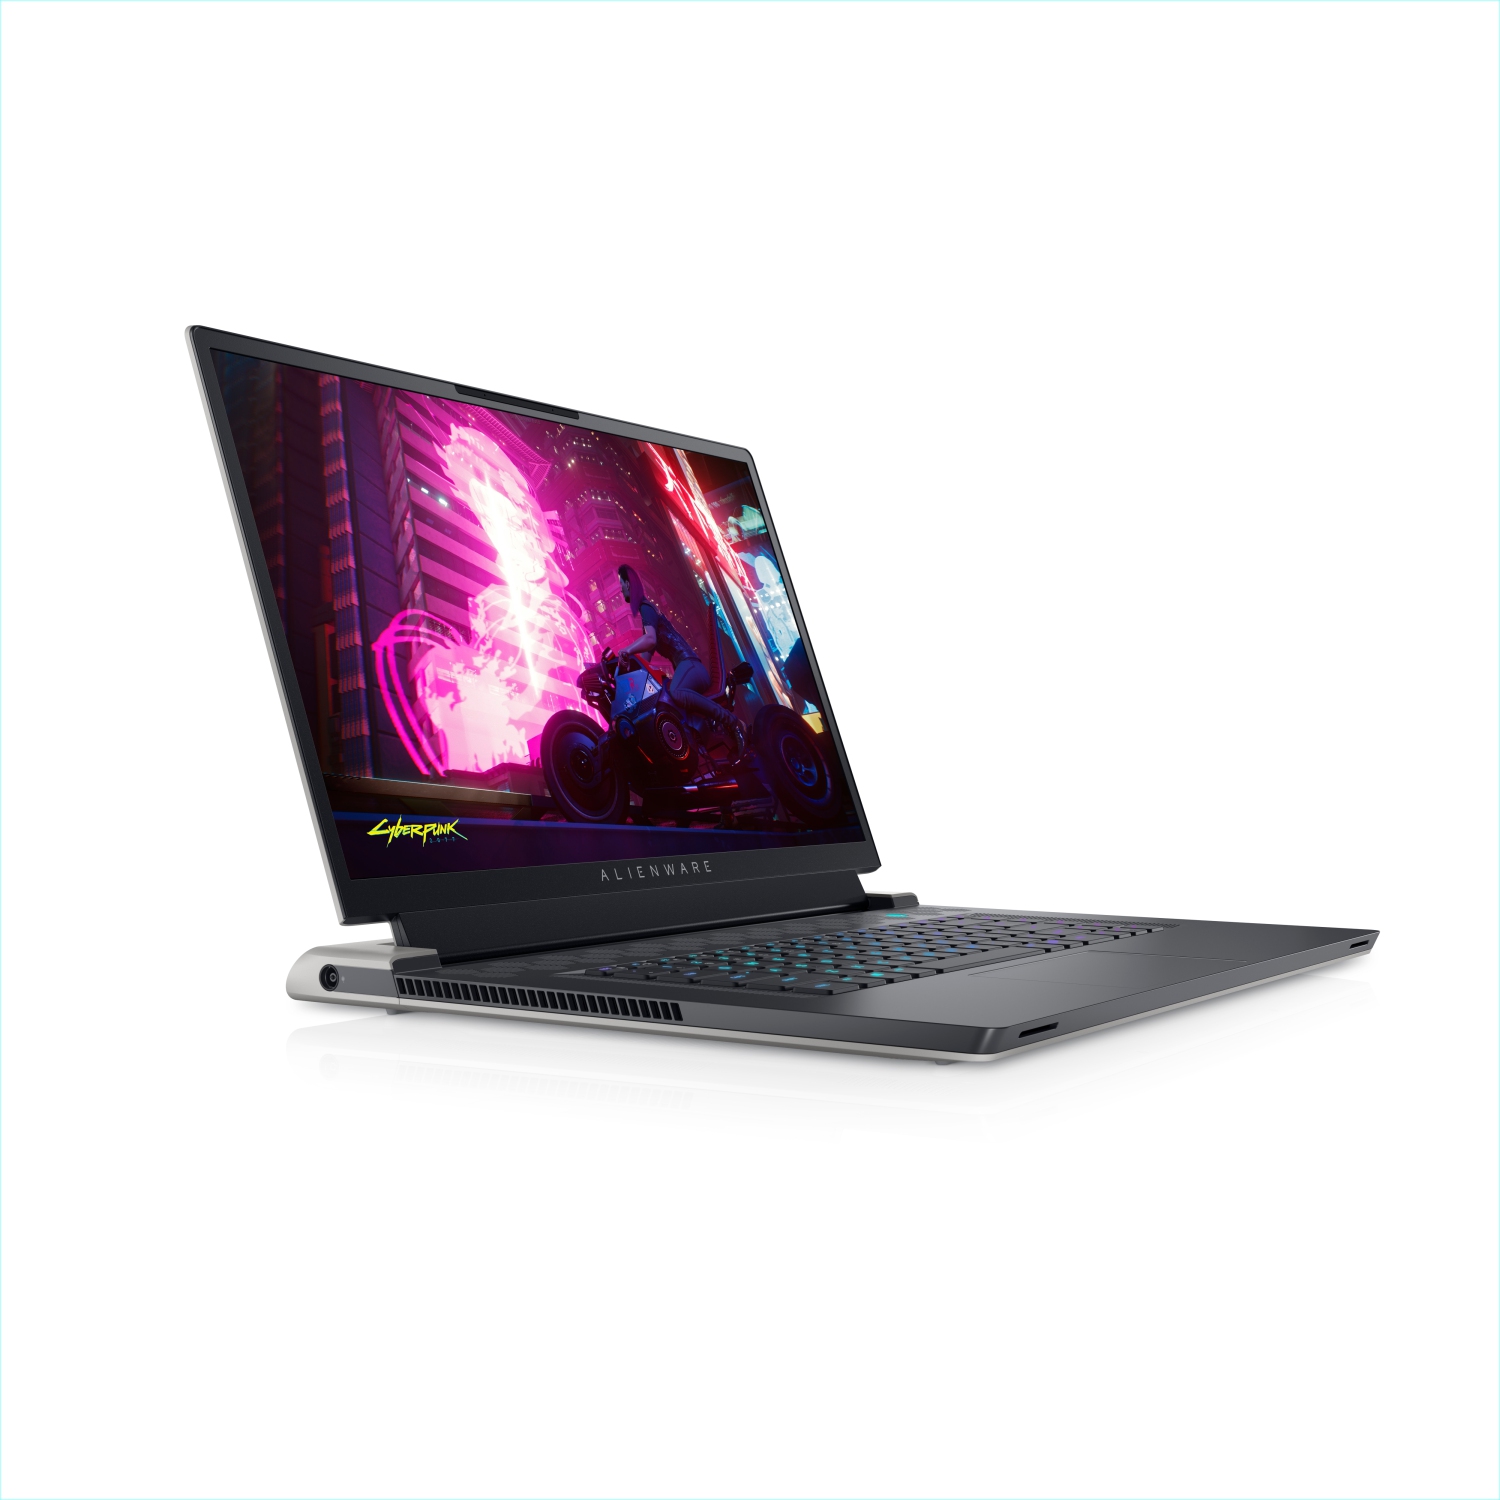 Refurbished (Excellent) - Dell Alienware X17 R1 Gaming Laptop (2021), 17.3" FHD, Core i7, 2TB SSD, 32GB RAM, RTX 3070, 8 Cores @ 4.6 GHz, 11th Gen CPU Certified